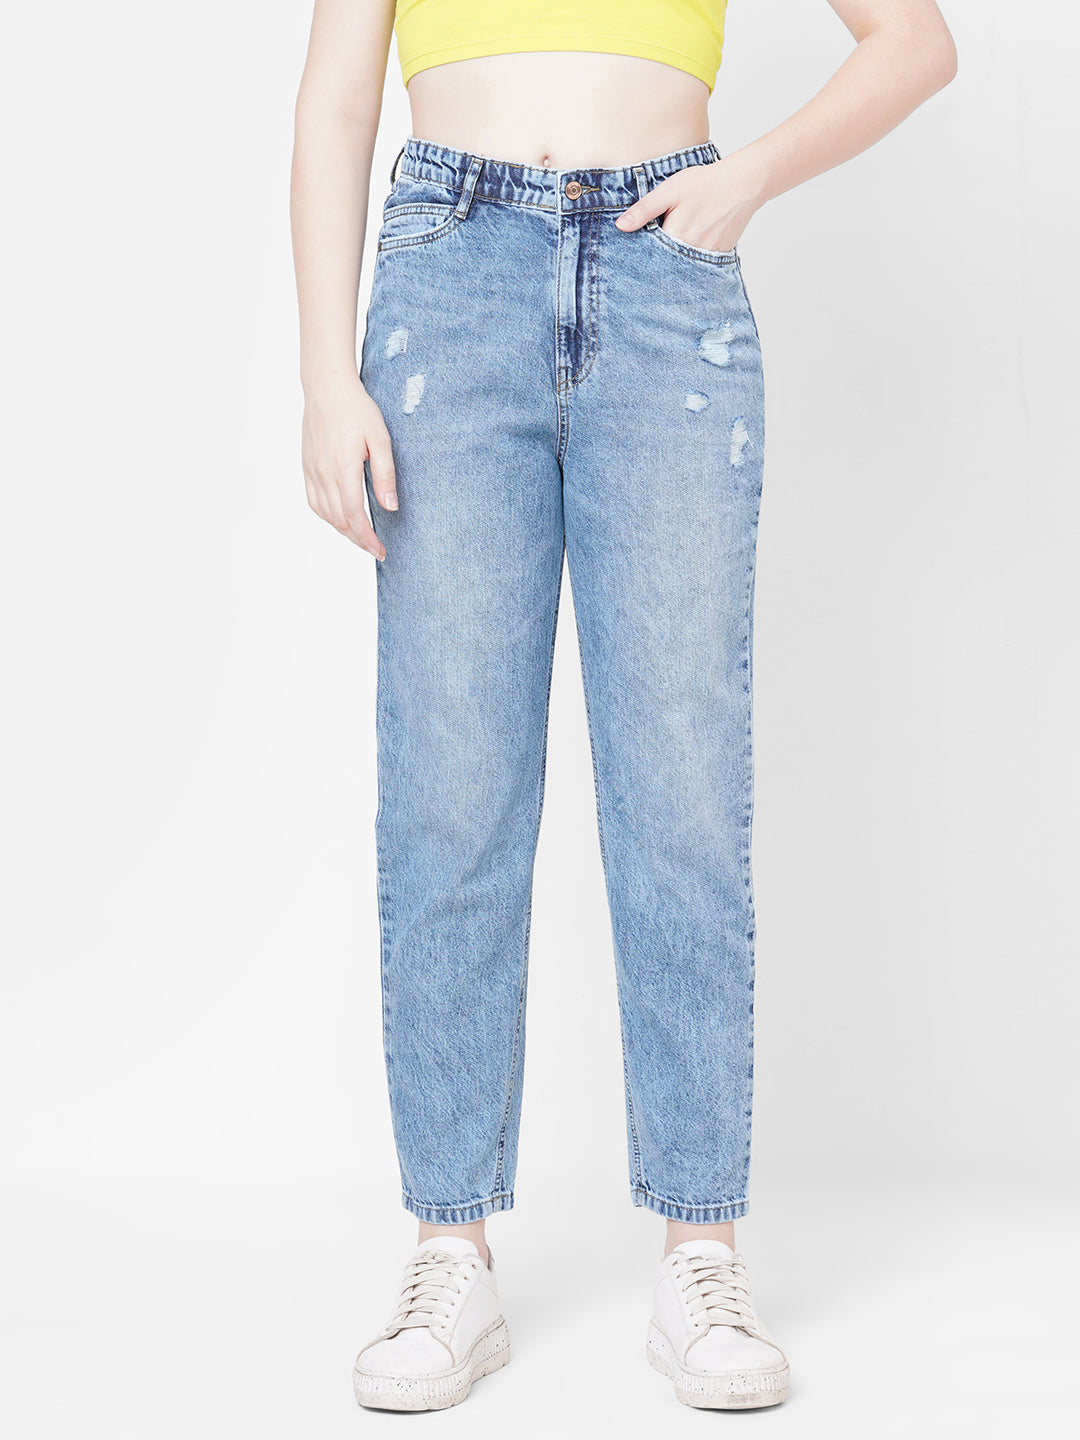 MOS MOSH Adeline Sia Mom Fit Jeans, Blue at John Lewis & Partners